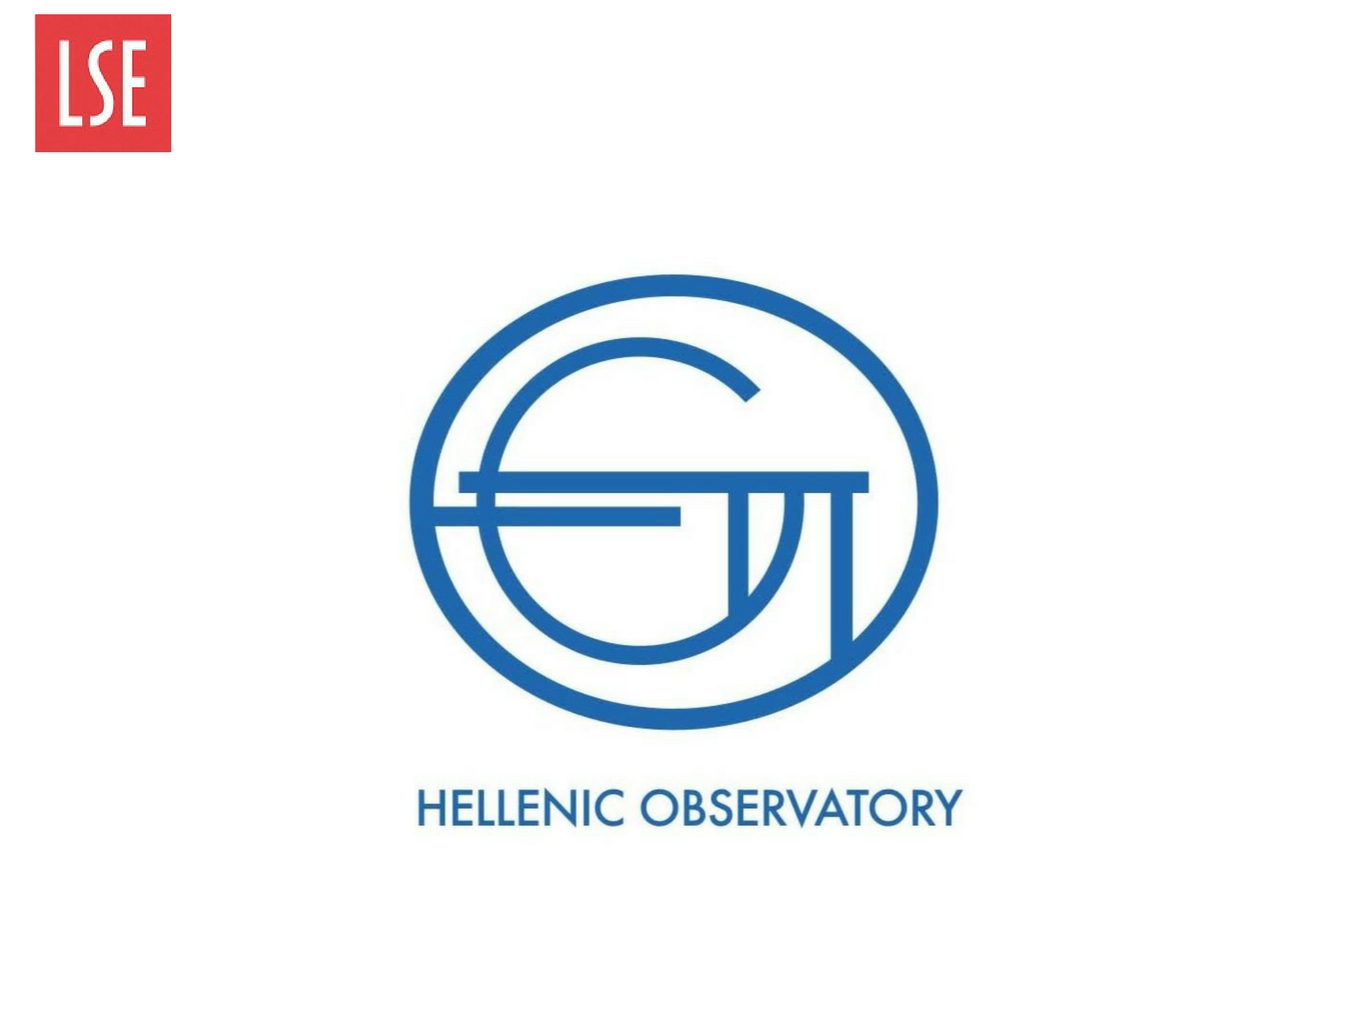 An Introduction to LSE's Hellenic Observatory